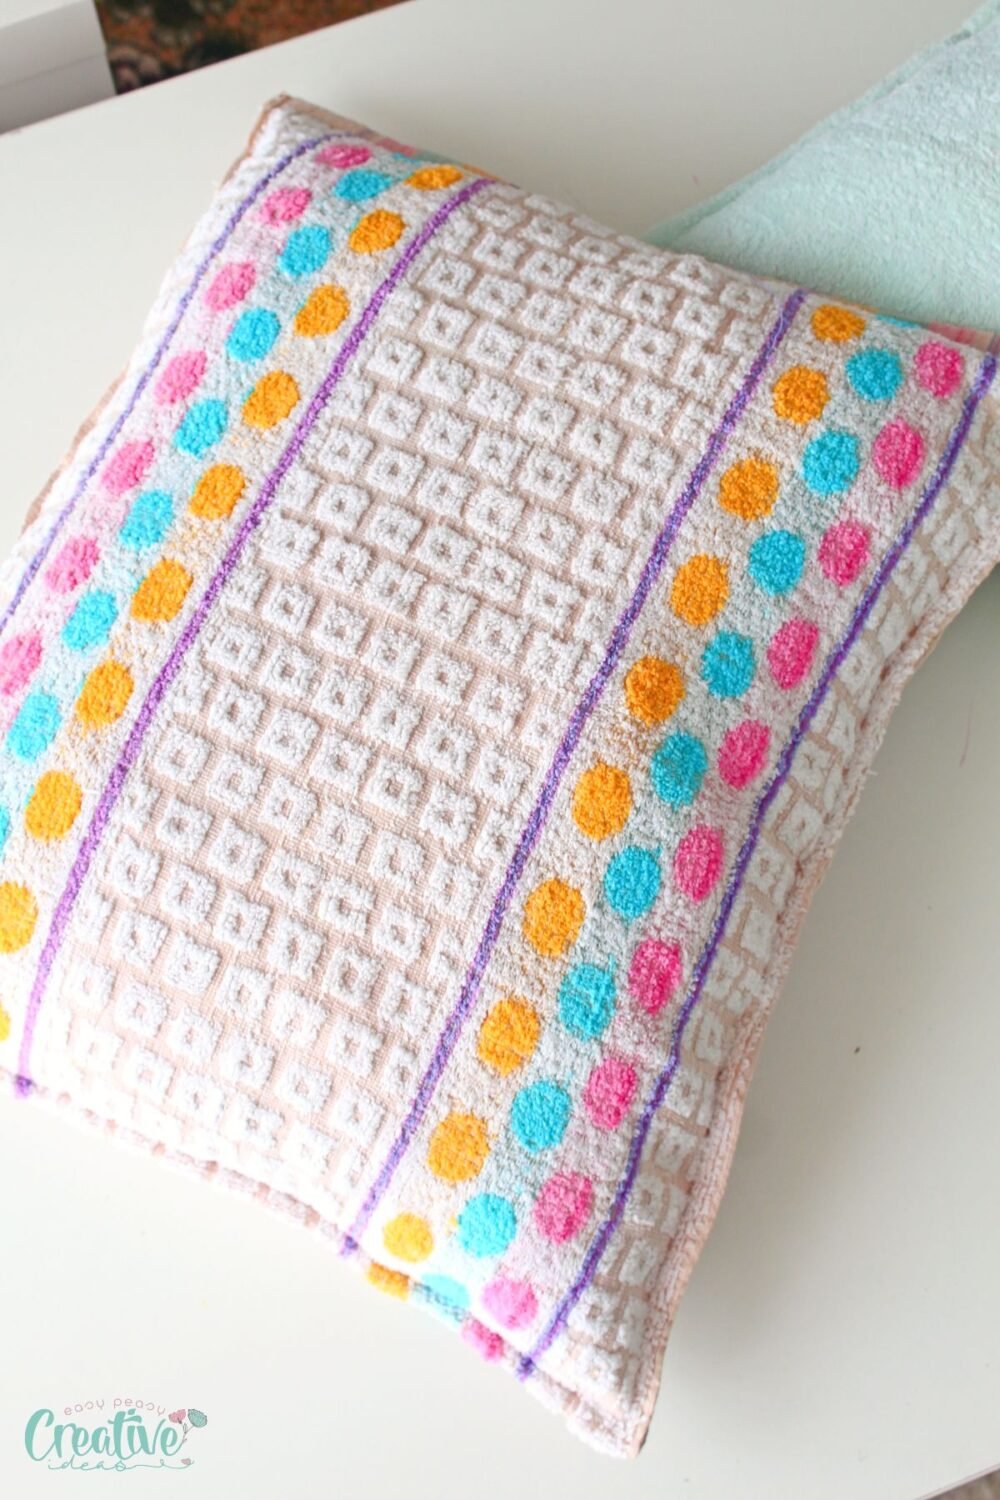 A cozy cat bed made from a towel. Sew one in 10 min - easy steps for a custom spot that matches your home décor!